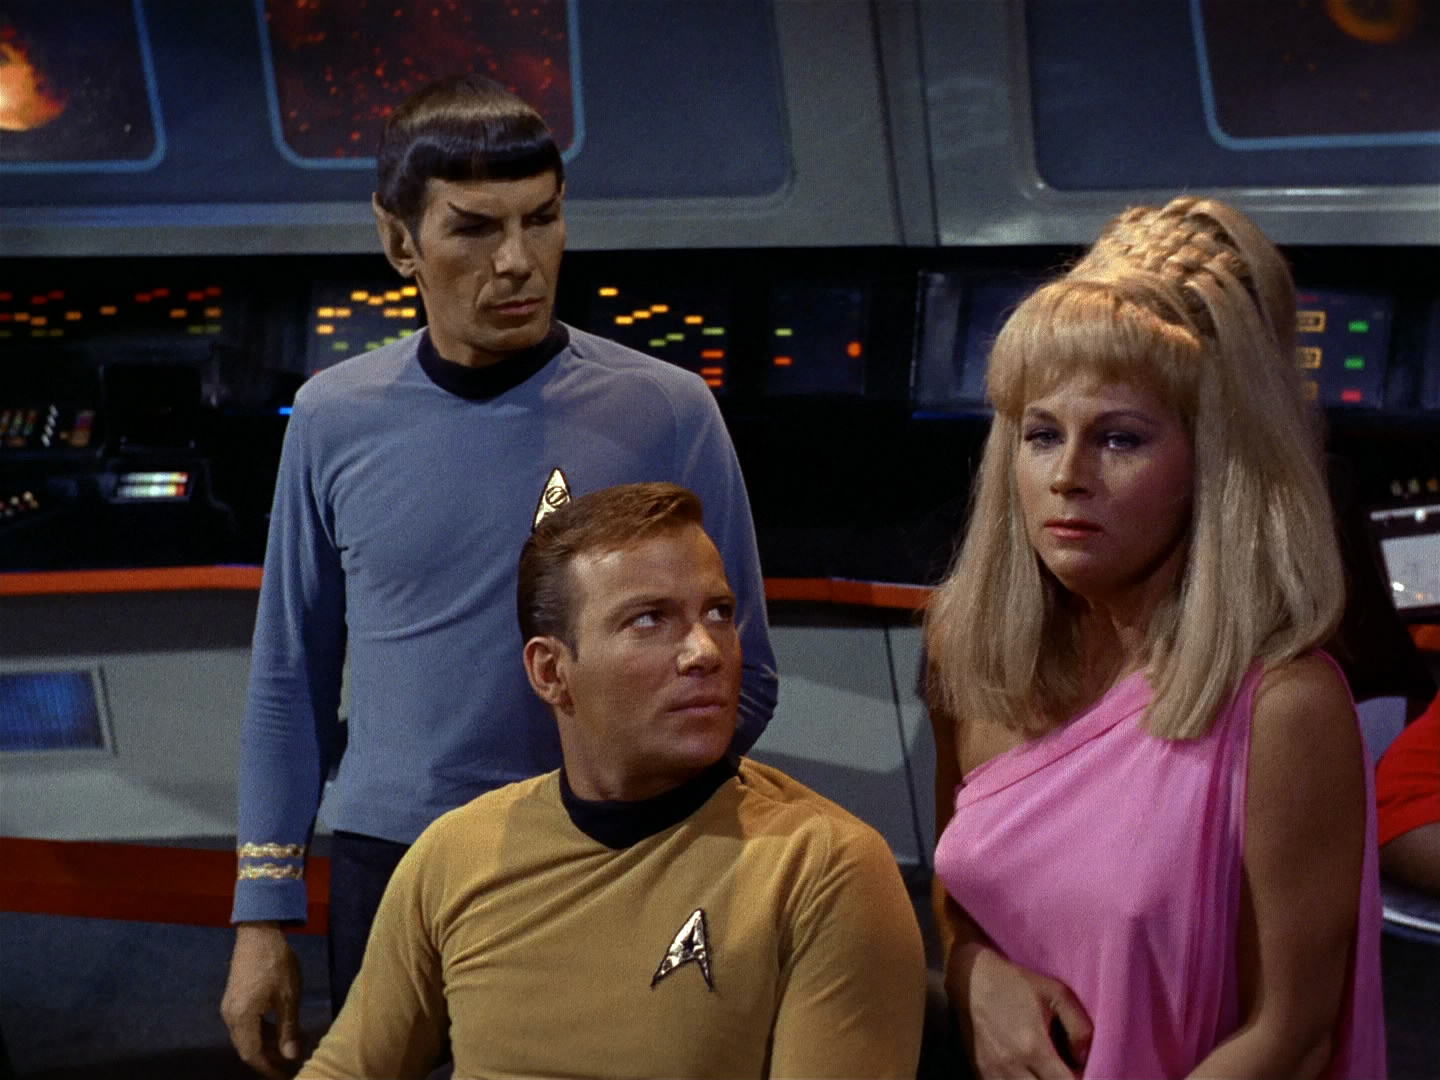 janice rand, images, image, wallpaper, photos, photo, photograph, gallery, star...